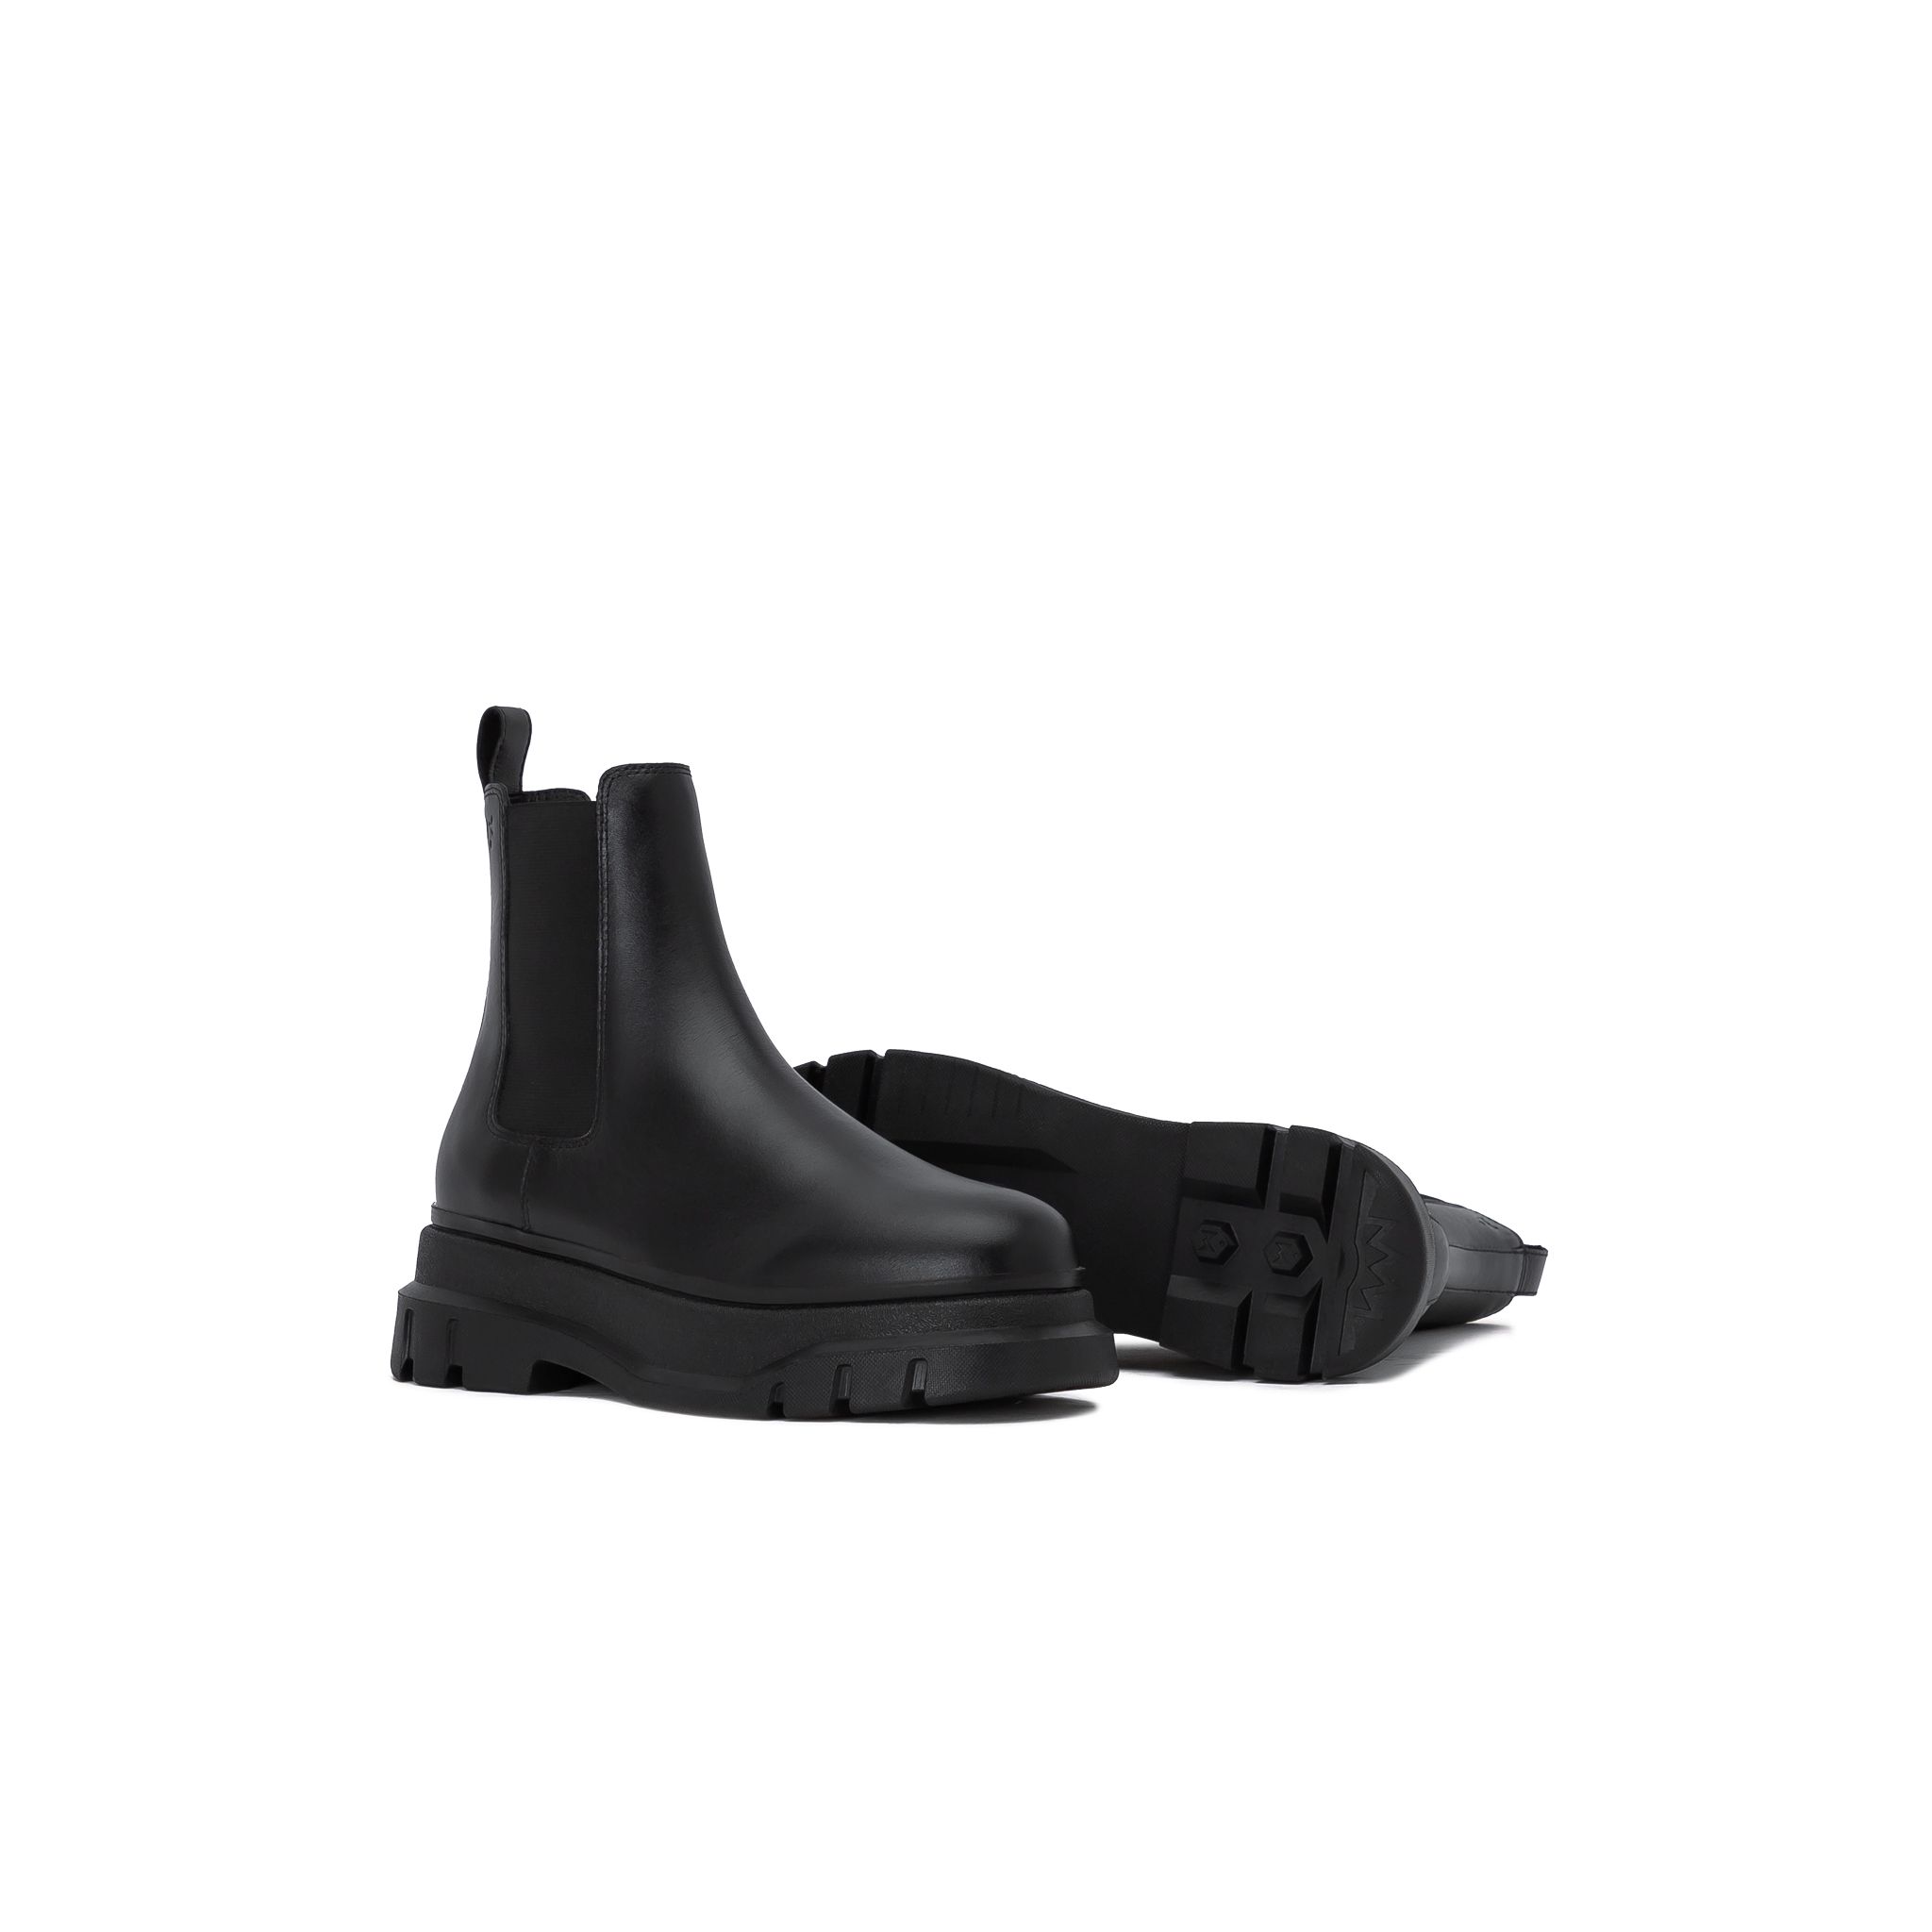  THE MARS WOLF CHELSEA BOOT - BLACK 